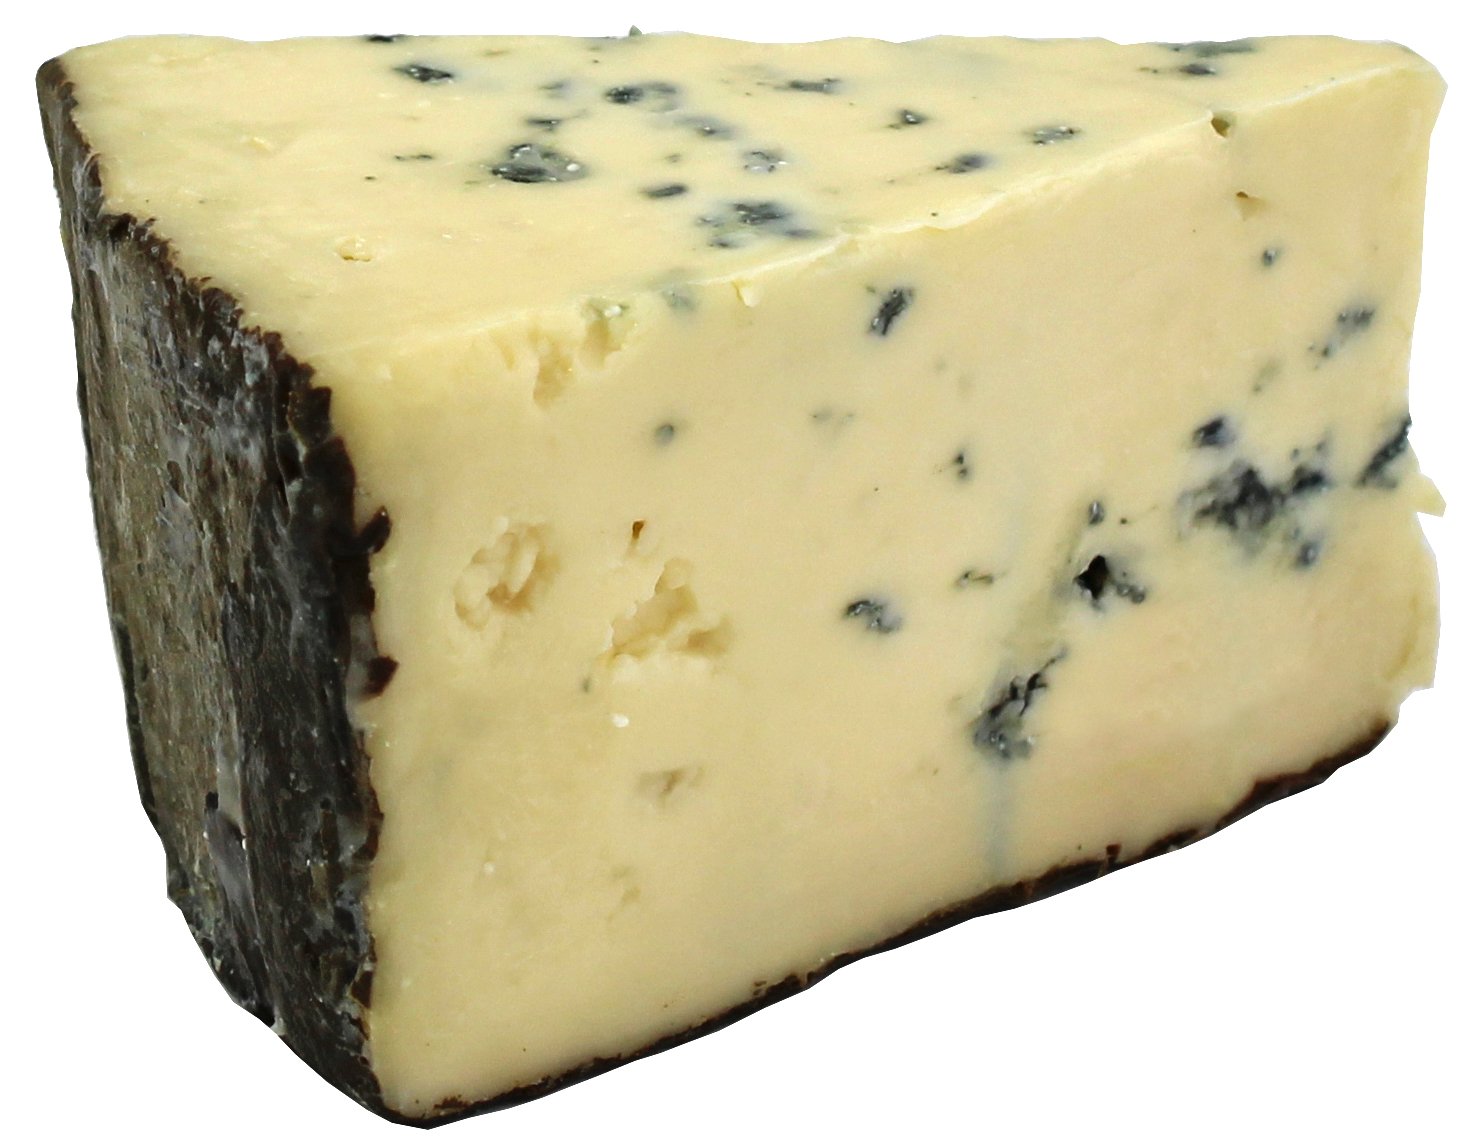 ROGUE CREAMERY ROGUE RIVER BLU Blue Cheese Special Reserve Shop Cheese at HEB